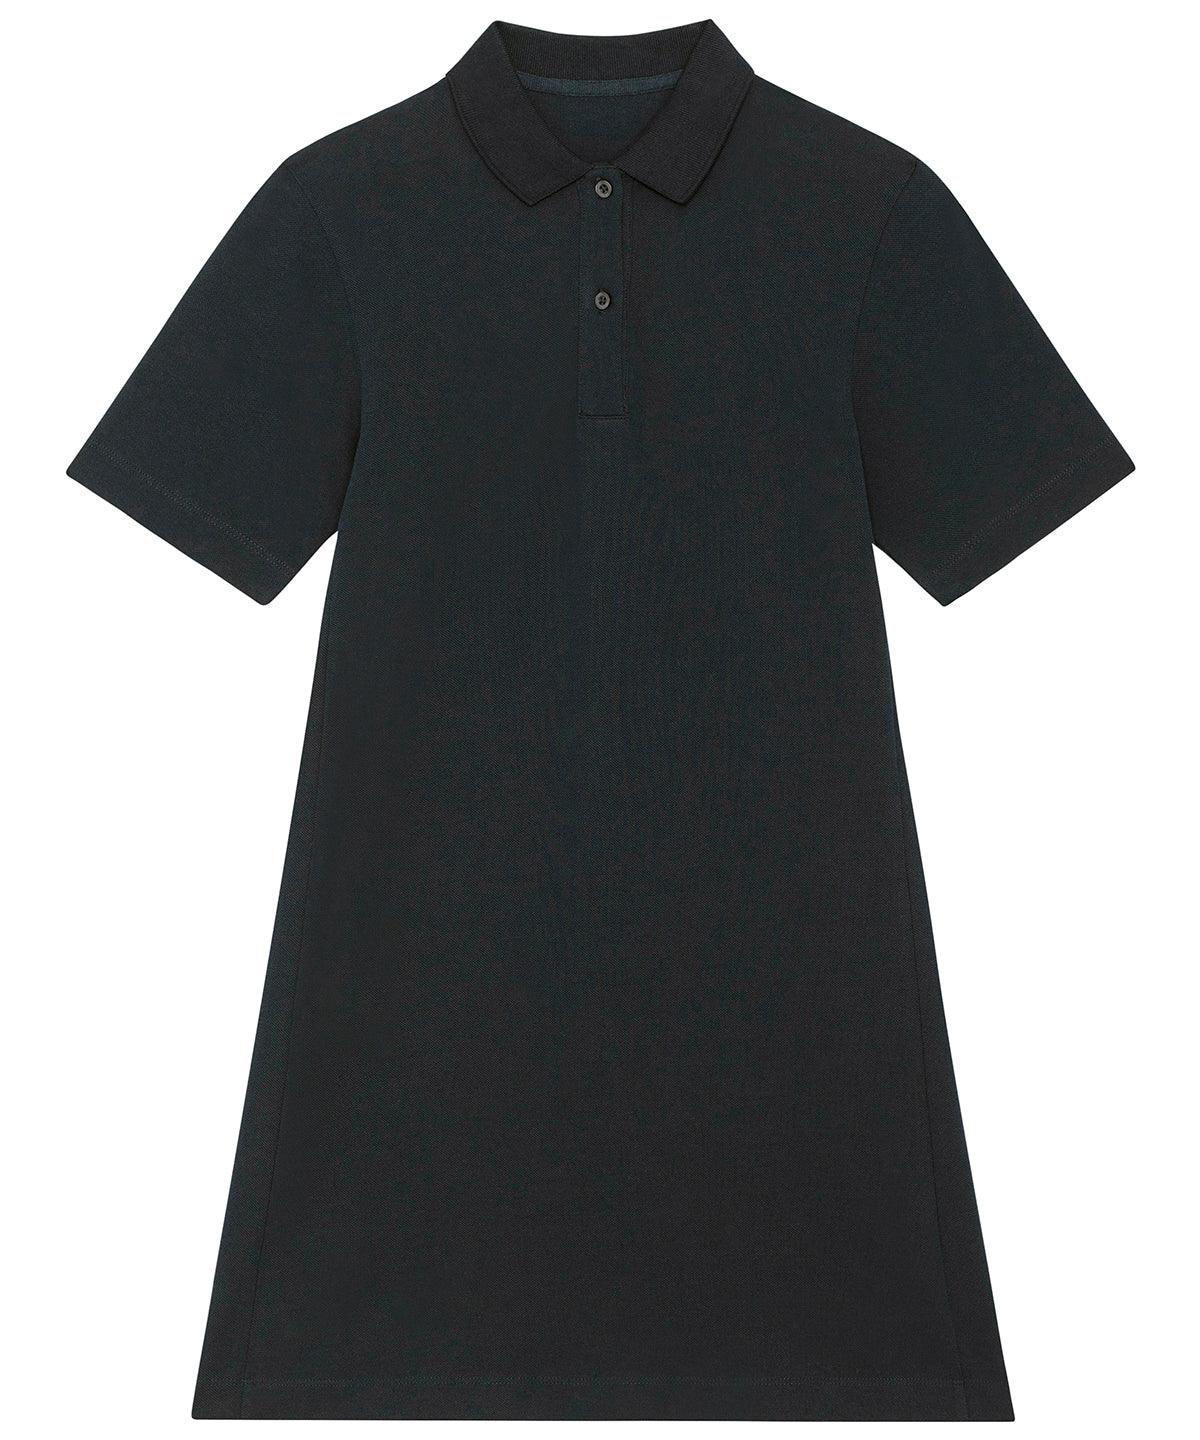 Black - Stella Paiger women's piqué polo dress (STDW162) Dresses Stanley/Stella Exclusives, New For 2021, New In Autumn Winter, New In Mid Year, Organic & Conscious, Polos & Casual, Stanley/ Stella, Women's Fashion Schoolwear Centres